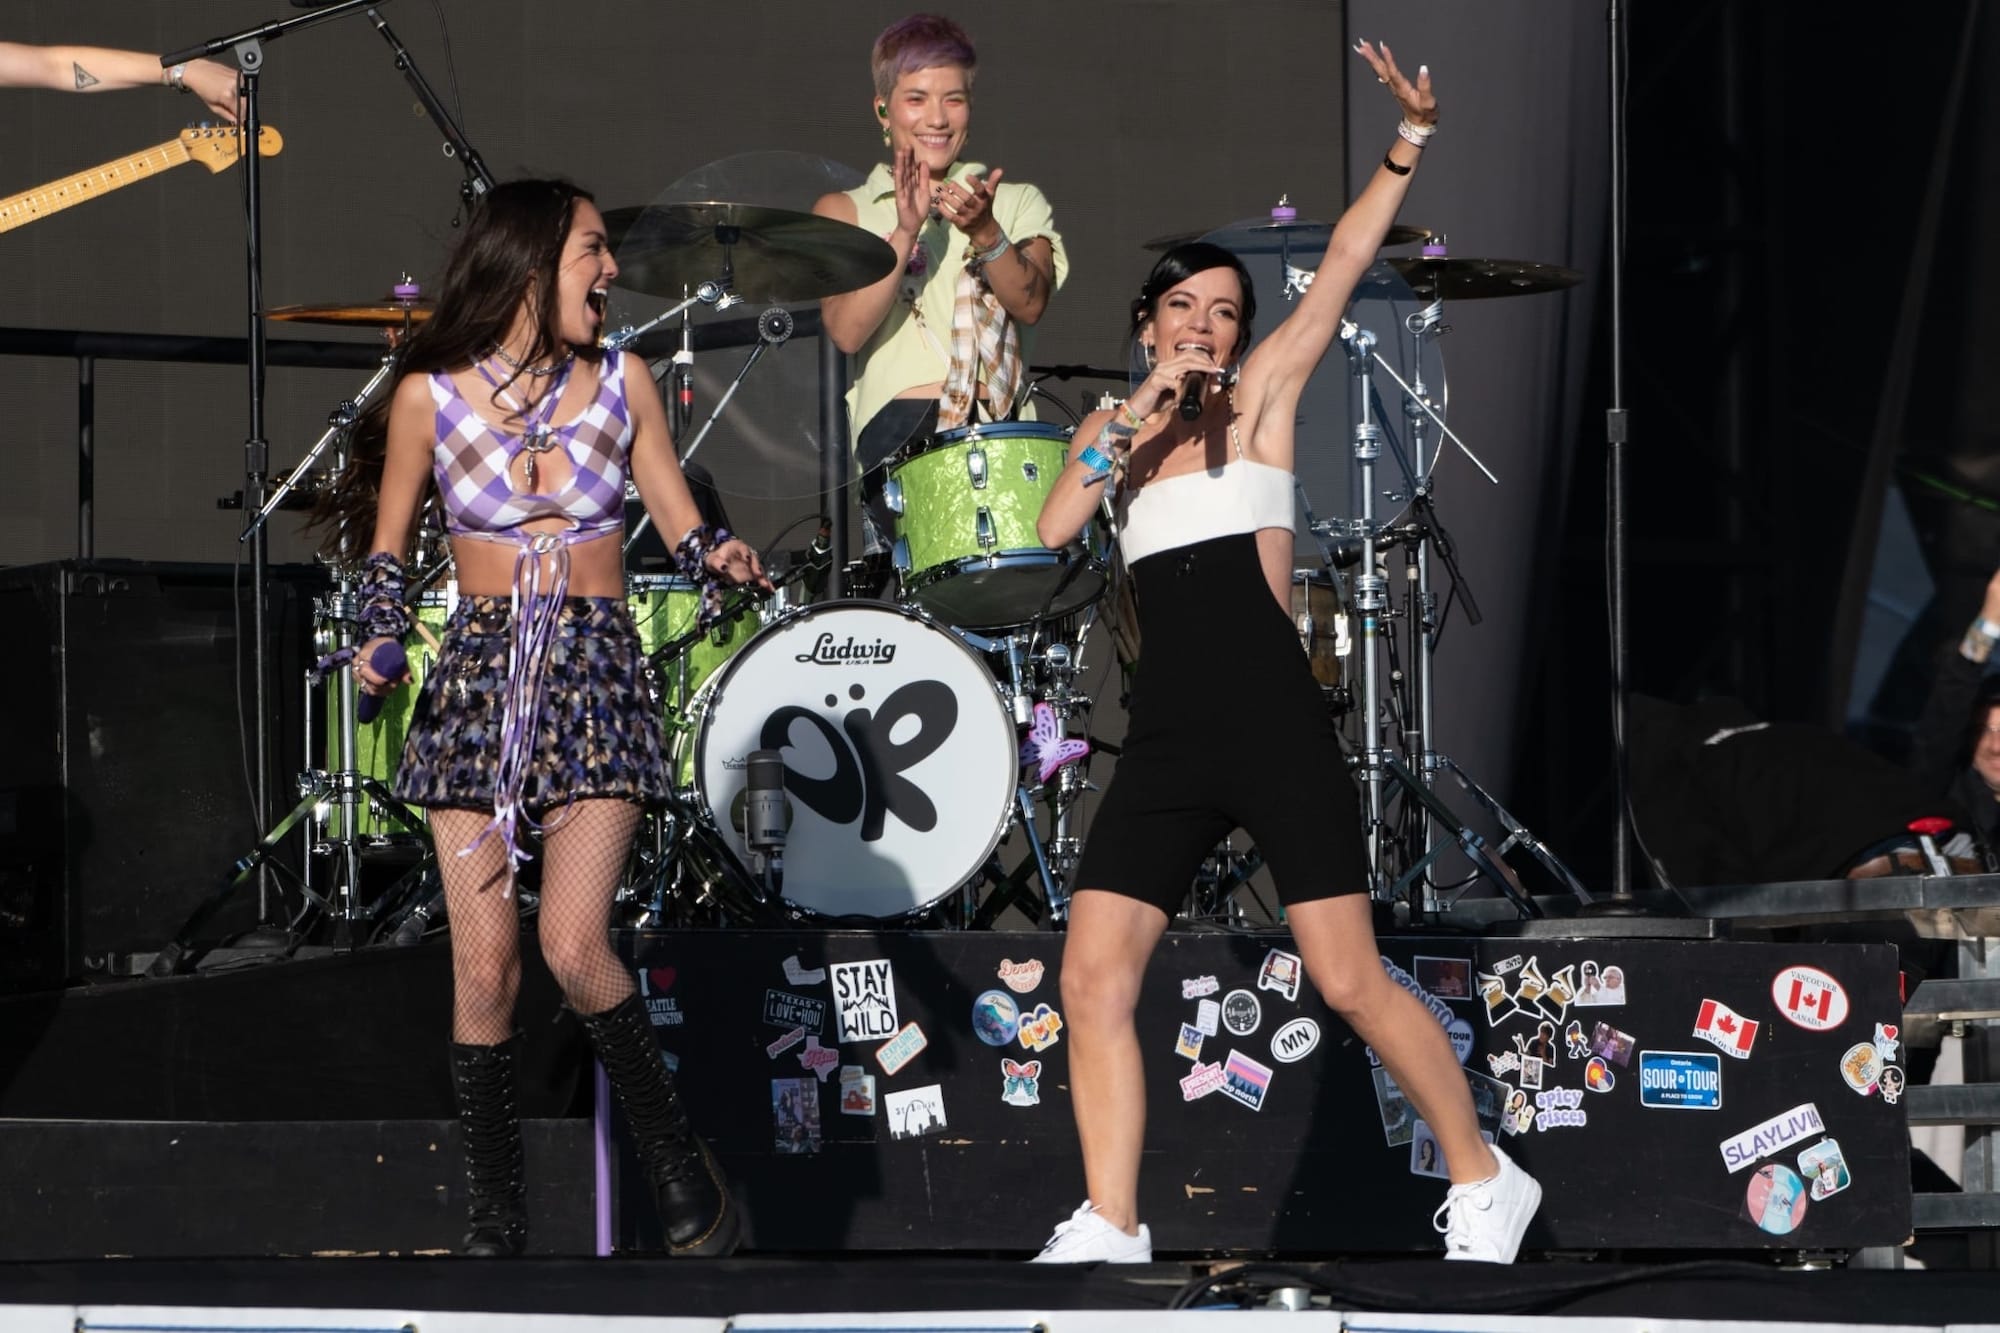 Olivia Rodrigo and Lily Allen performing F*** You at the 2022 Glastonbury Festival on June 25.